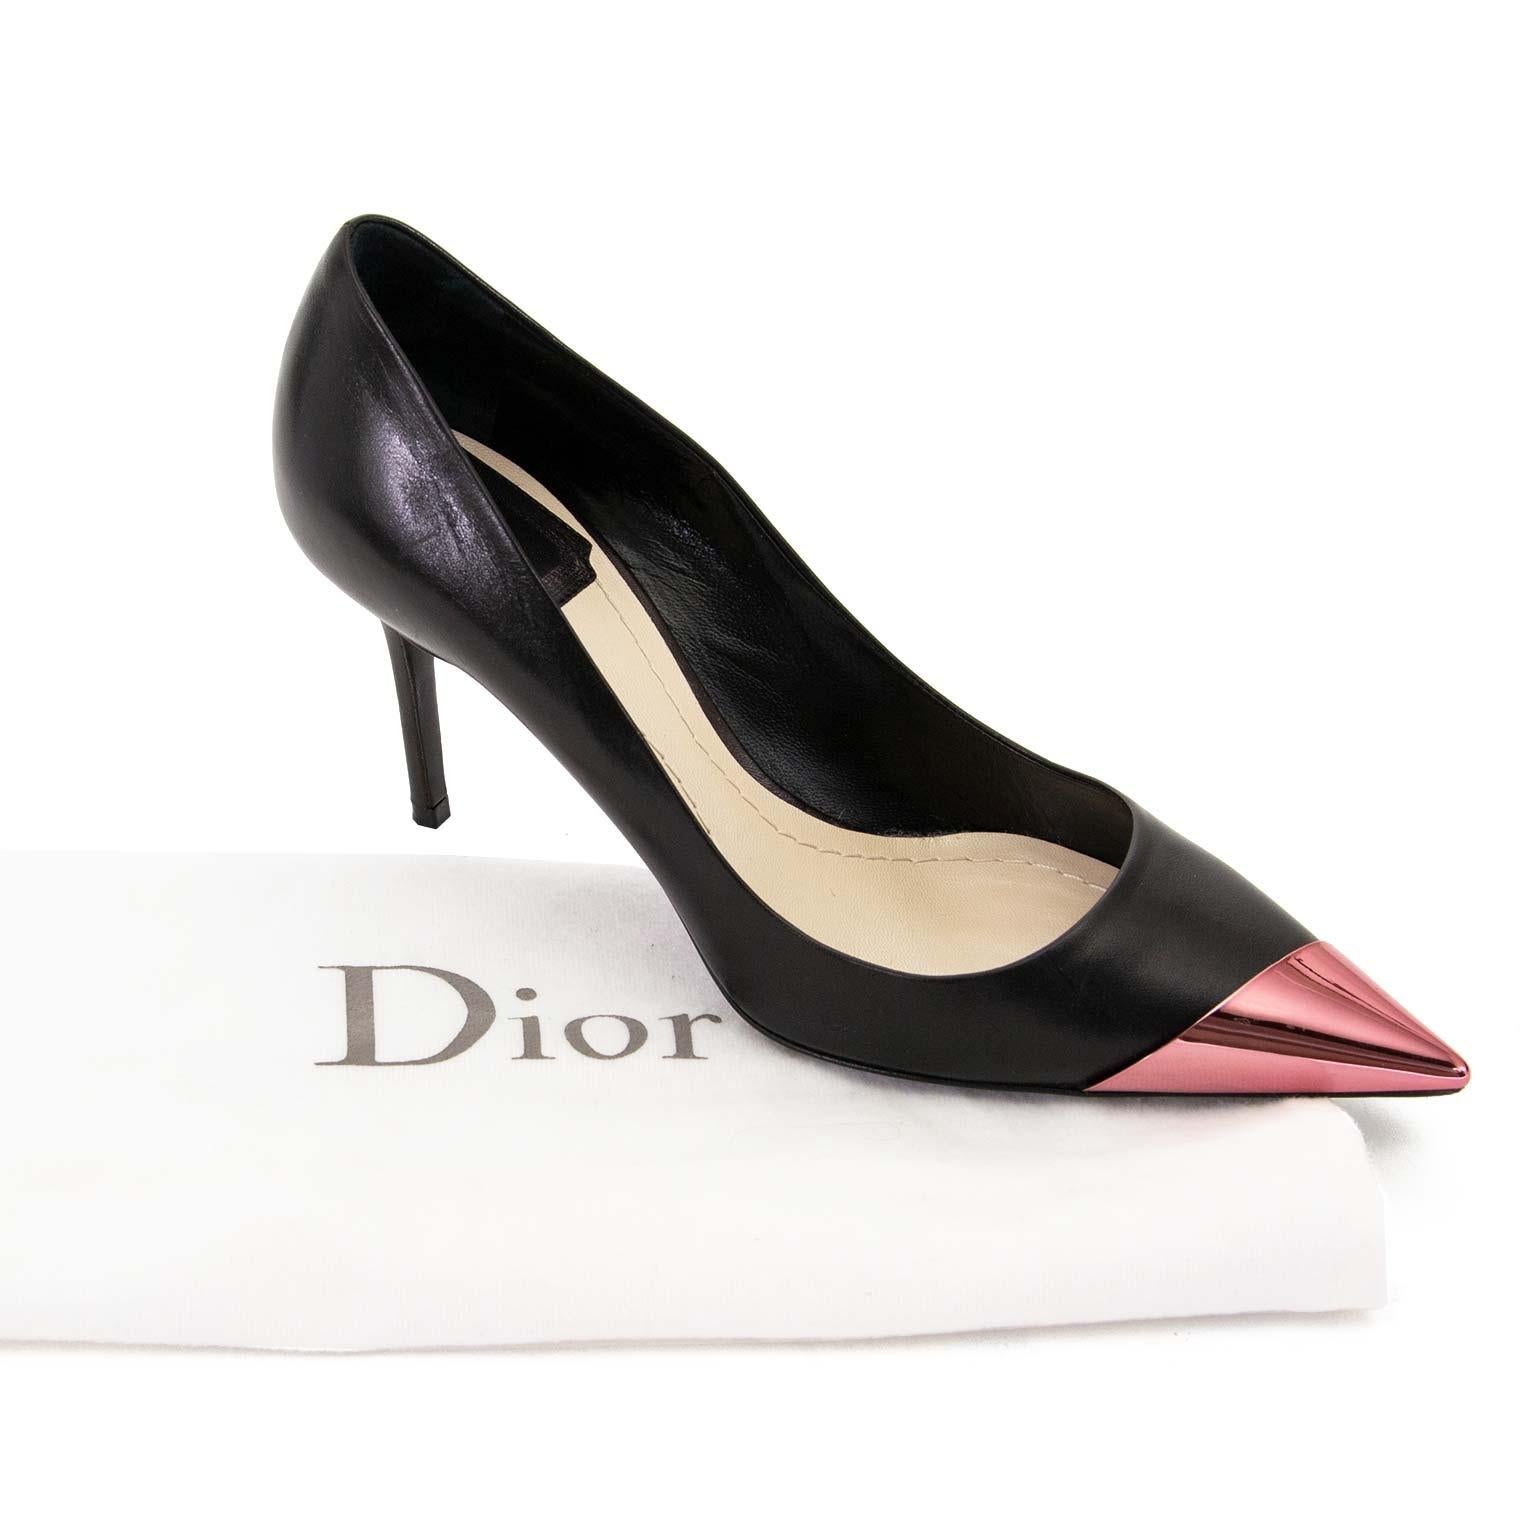 As New!

Christian Dior Black Pointed Metallic Cap Toe Pumps - Size 36.5

Looking for a classic pair of pumps with a twist?
These gorgeous Christian Dior pumps are crafted in black leather and feature a metallic pink cap toe.
These beauties will add